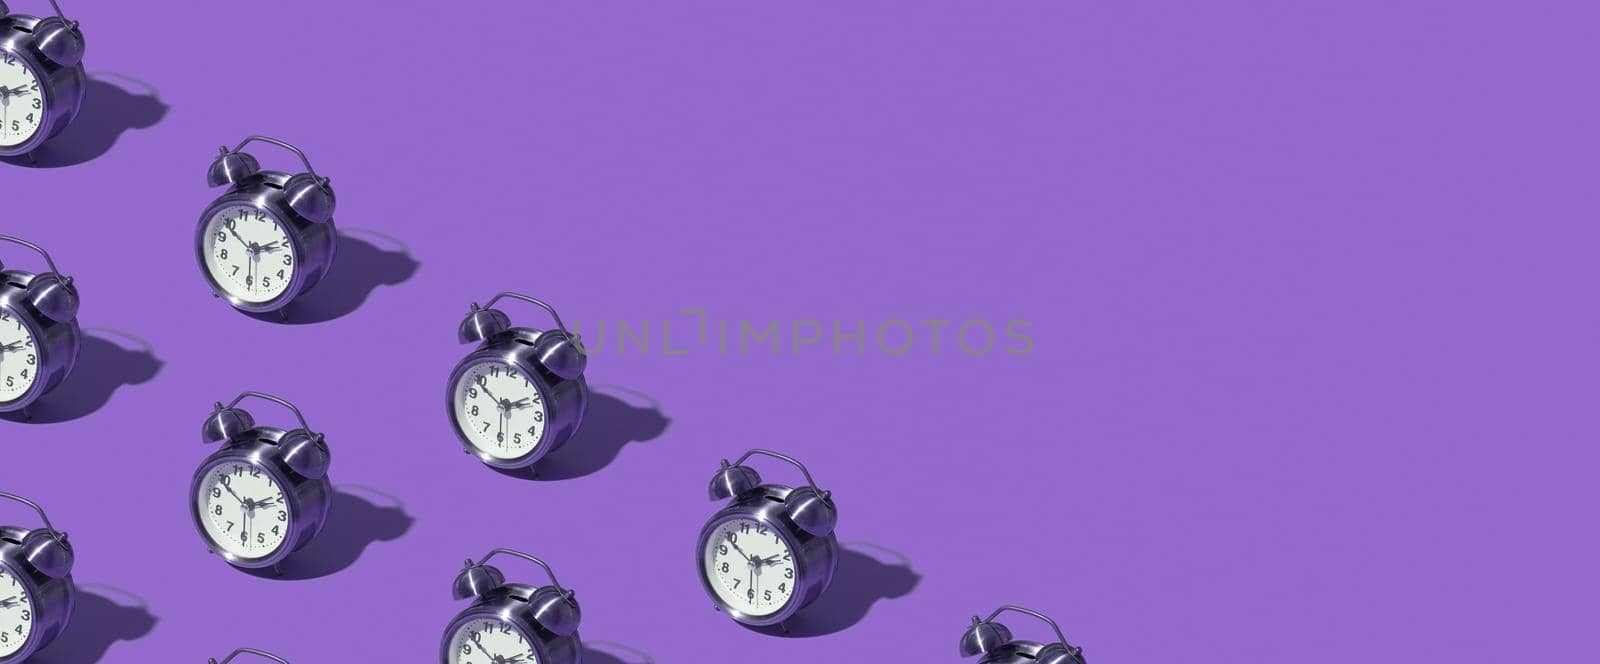 Pattern of an alarm clock on a colored background. Monochrome time concept. Banner format. by ssvimaliss